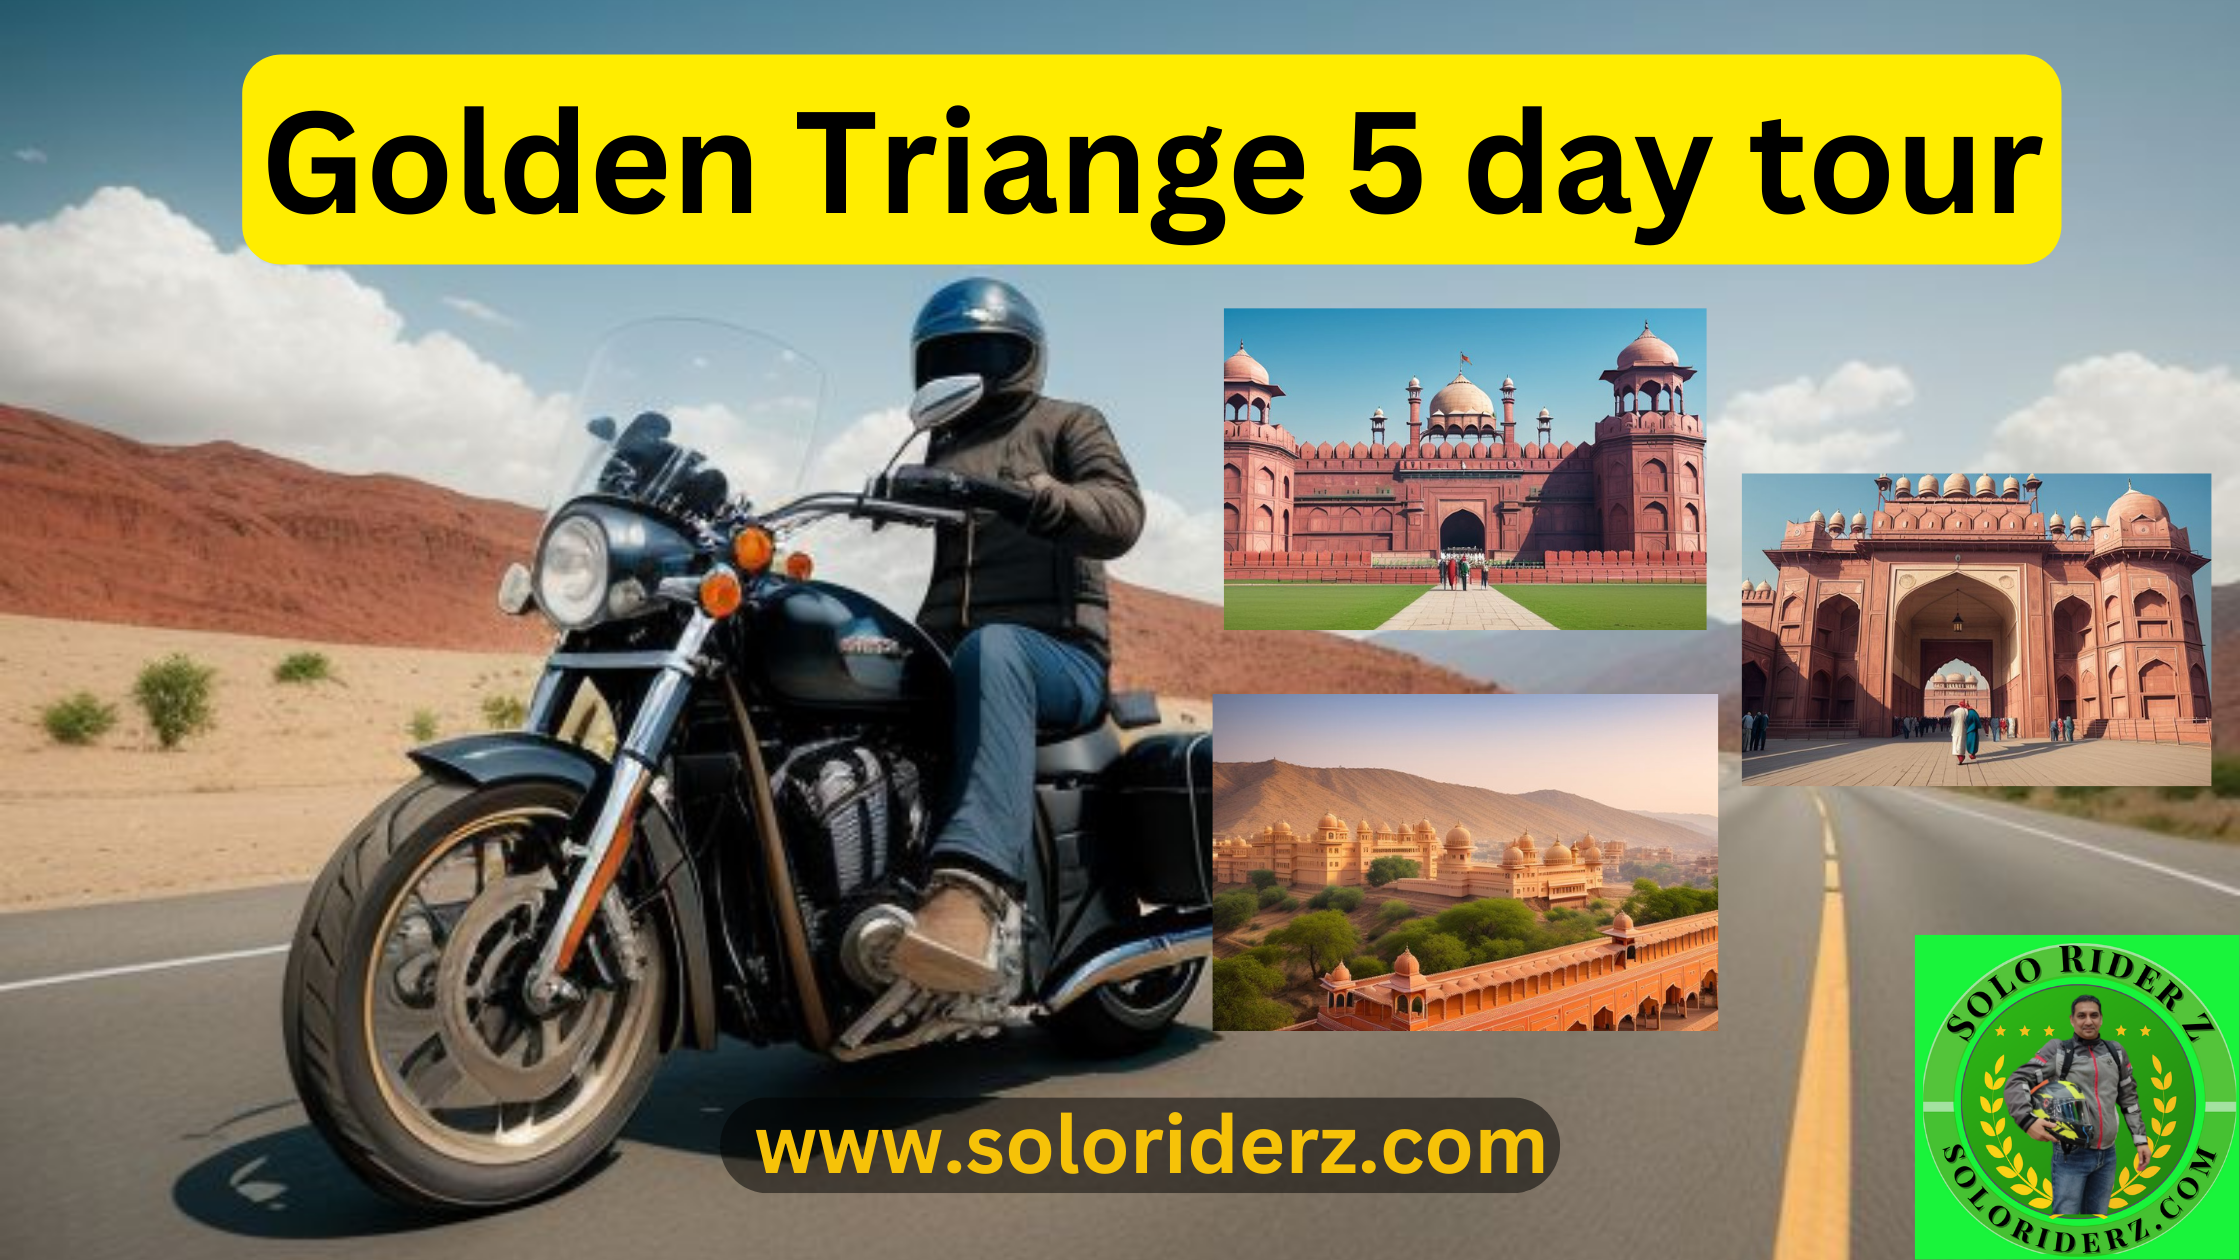 golden triangle 5 day tour - soloriderz